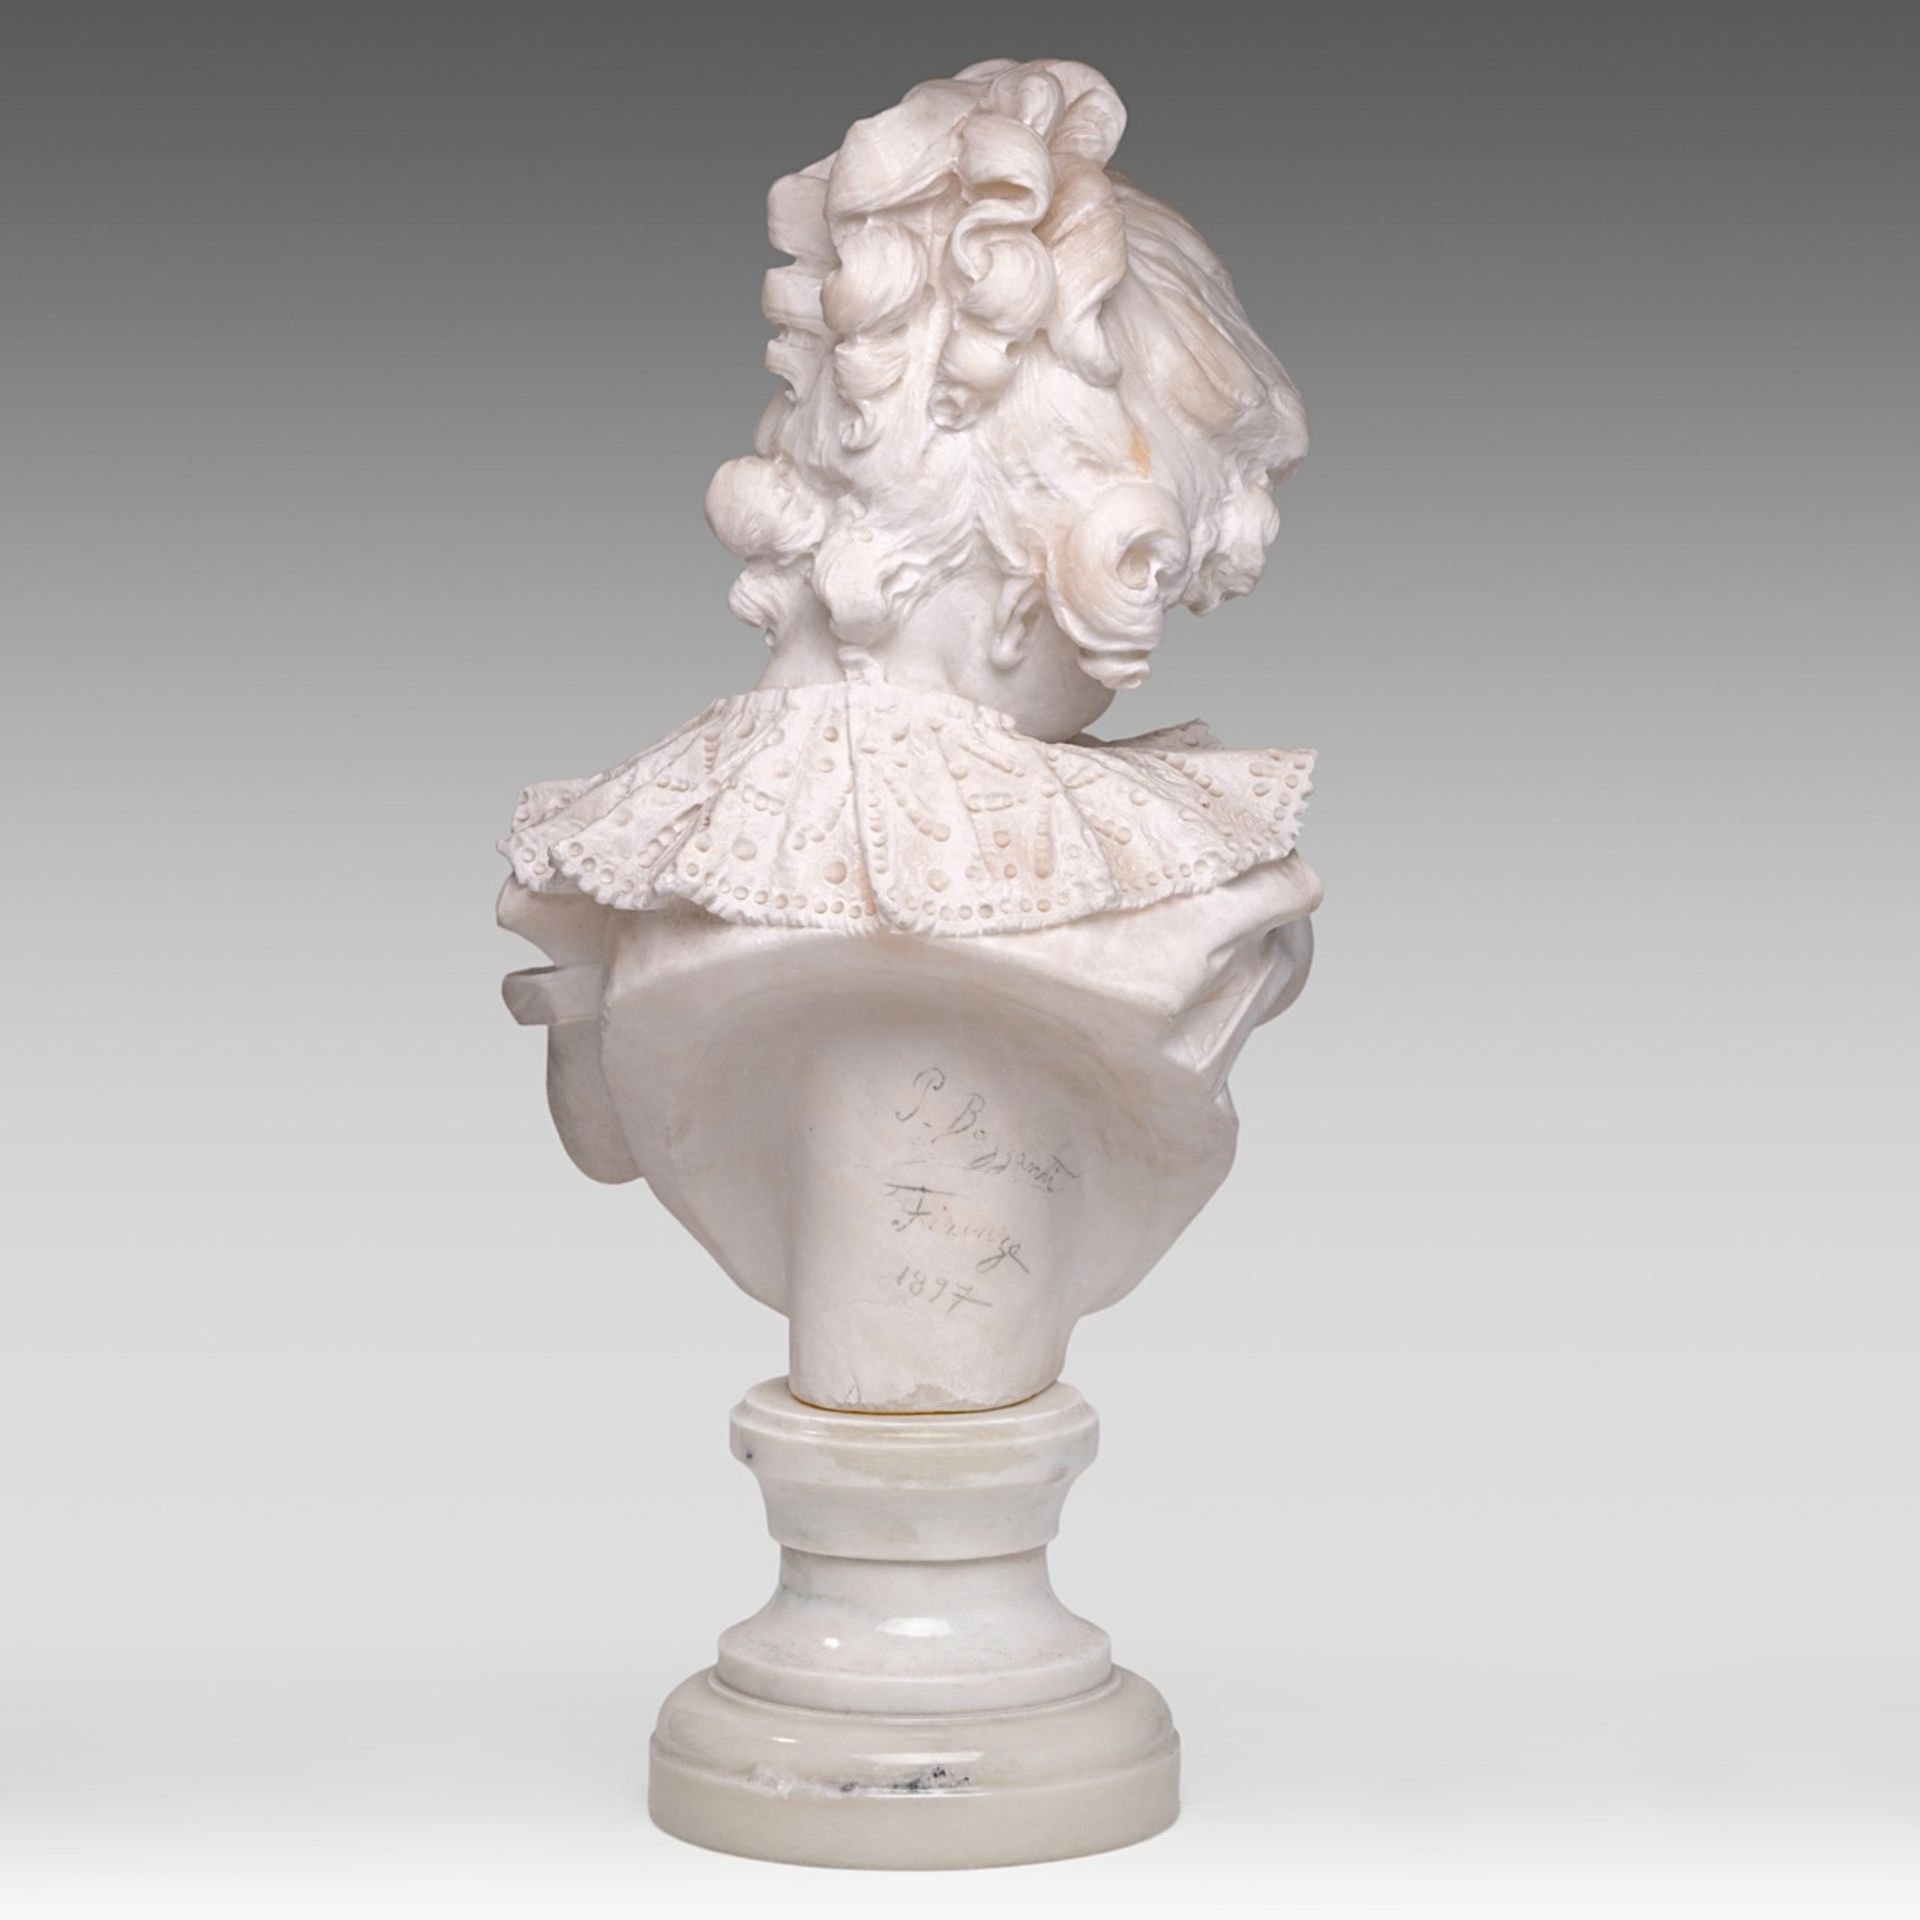 Studio of Pietro Bazzanti (1825-1895), the Carrara marble bust of a girl with a lacework collar, H 6 - Image 4 of 7